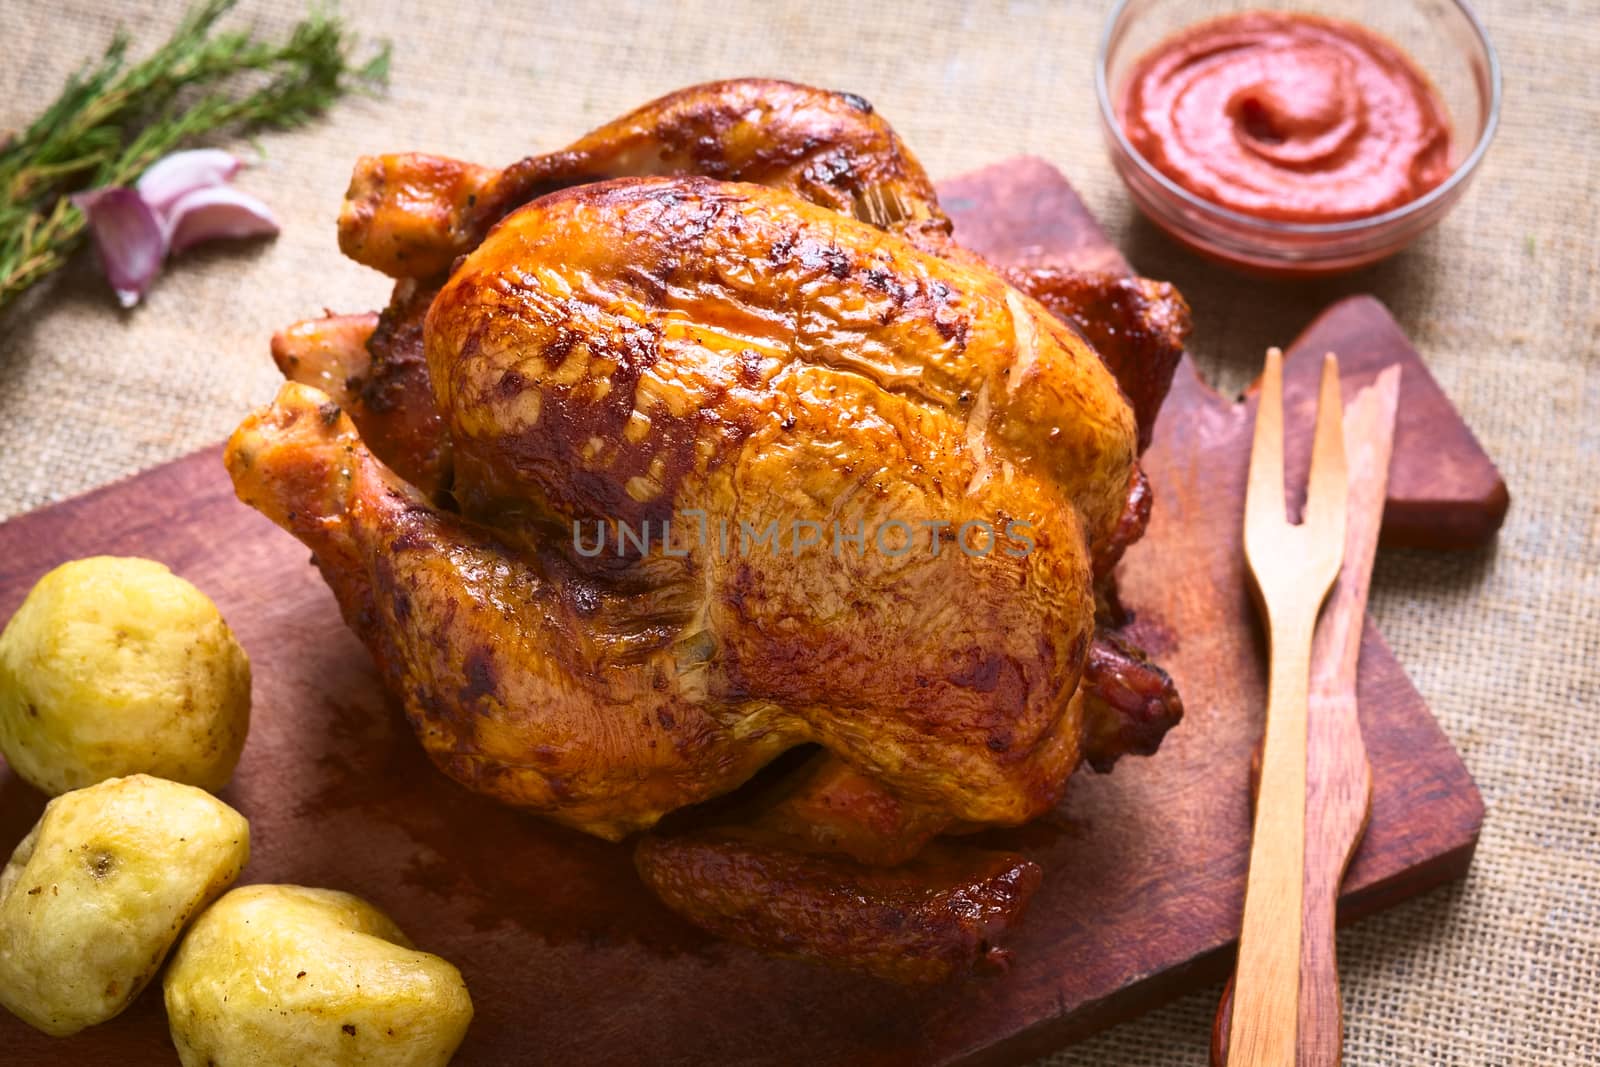 Roast chicken on wooden board with potatoes and ketchup, photographed with natural light (Selective Focus, Focus on the front of the chicken)  